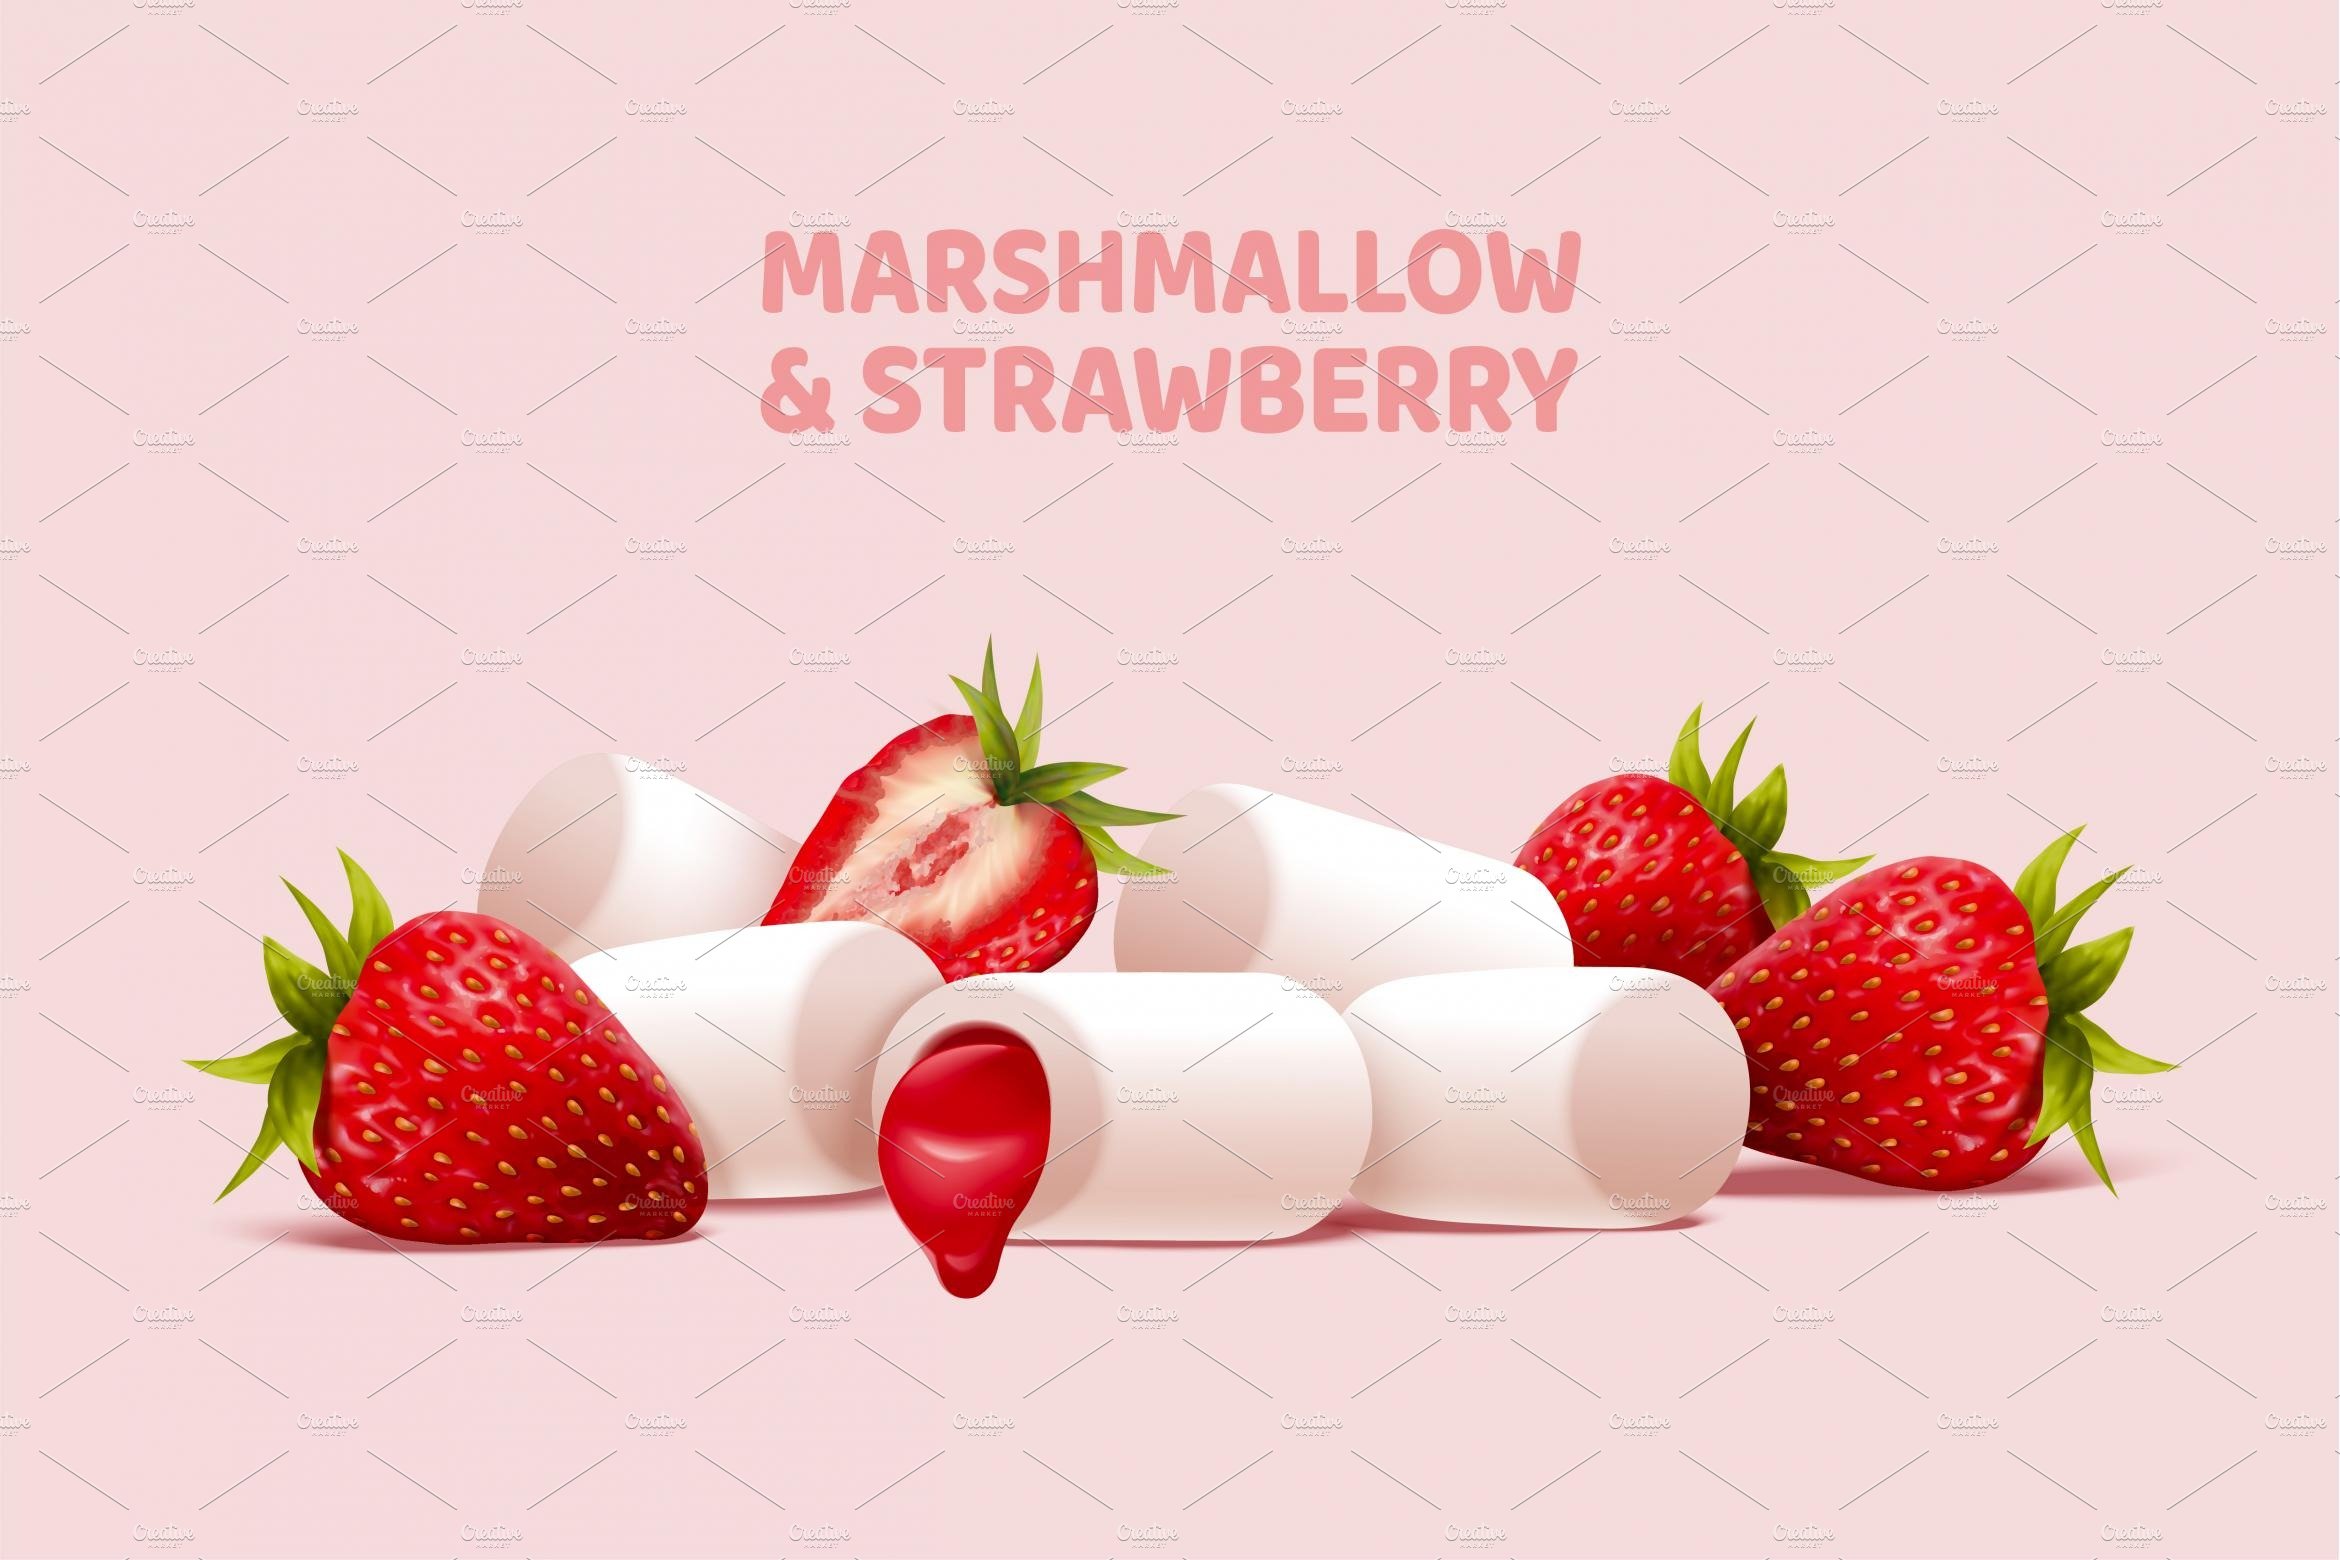 Marshmallow and strawberry cover image.